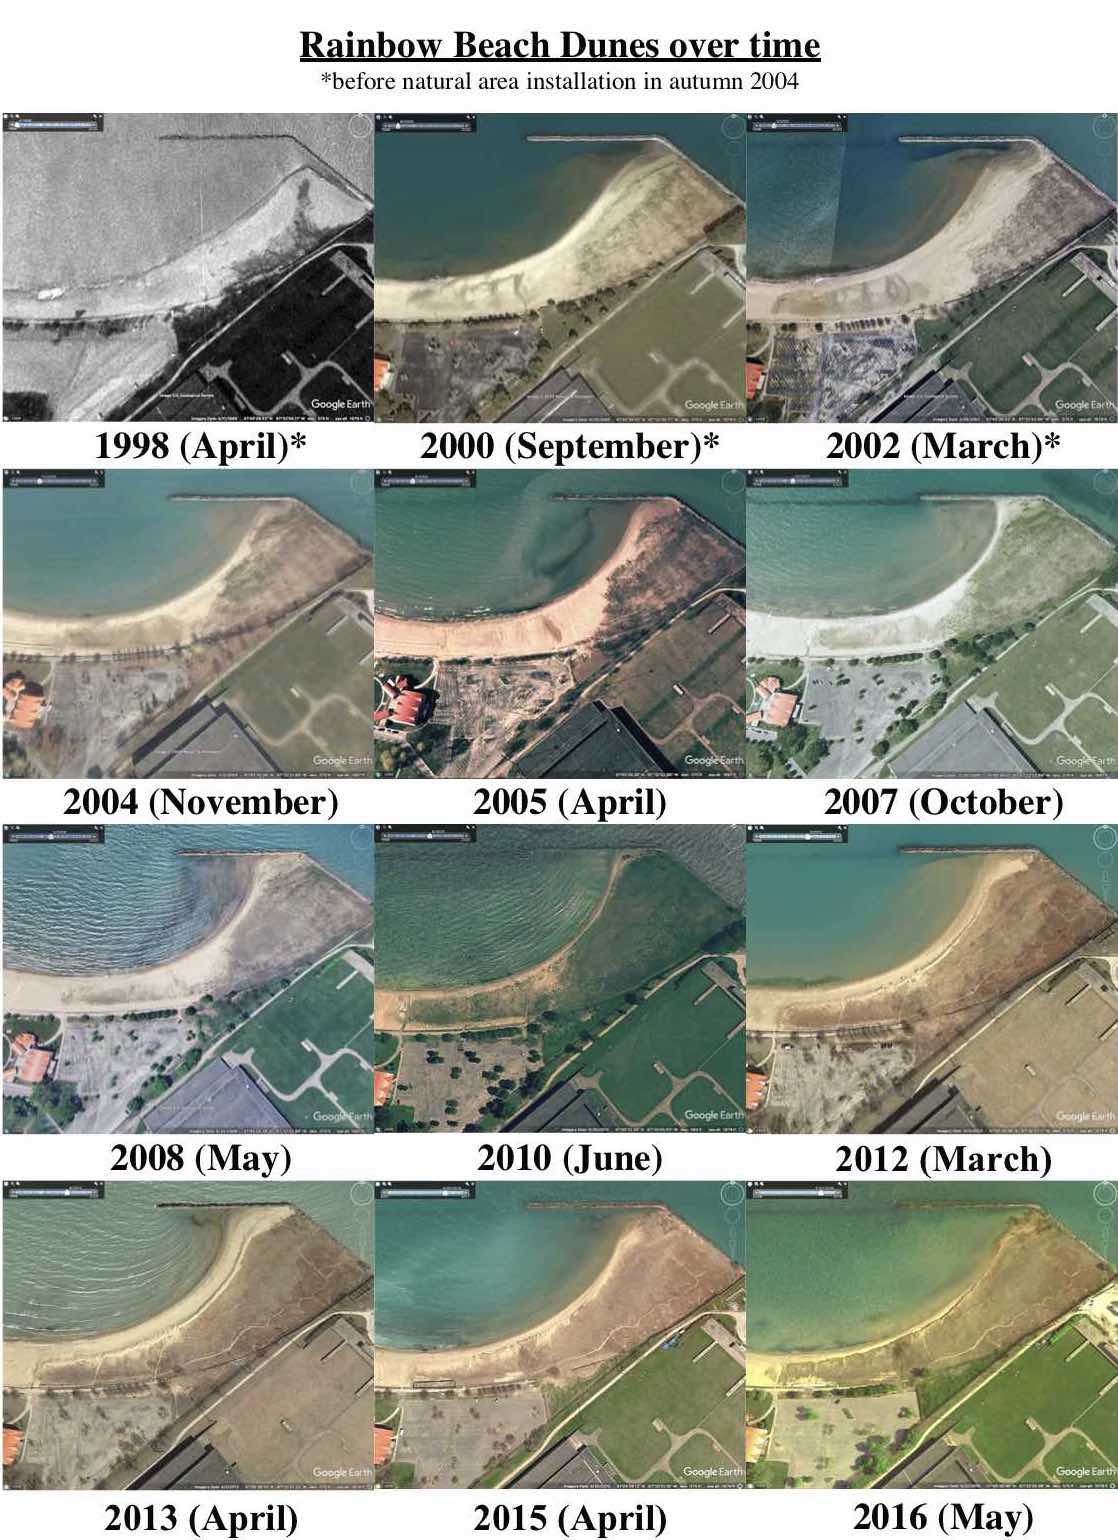 RBD aerial pics over time1